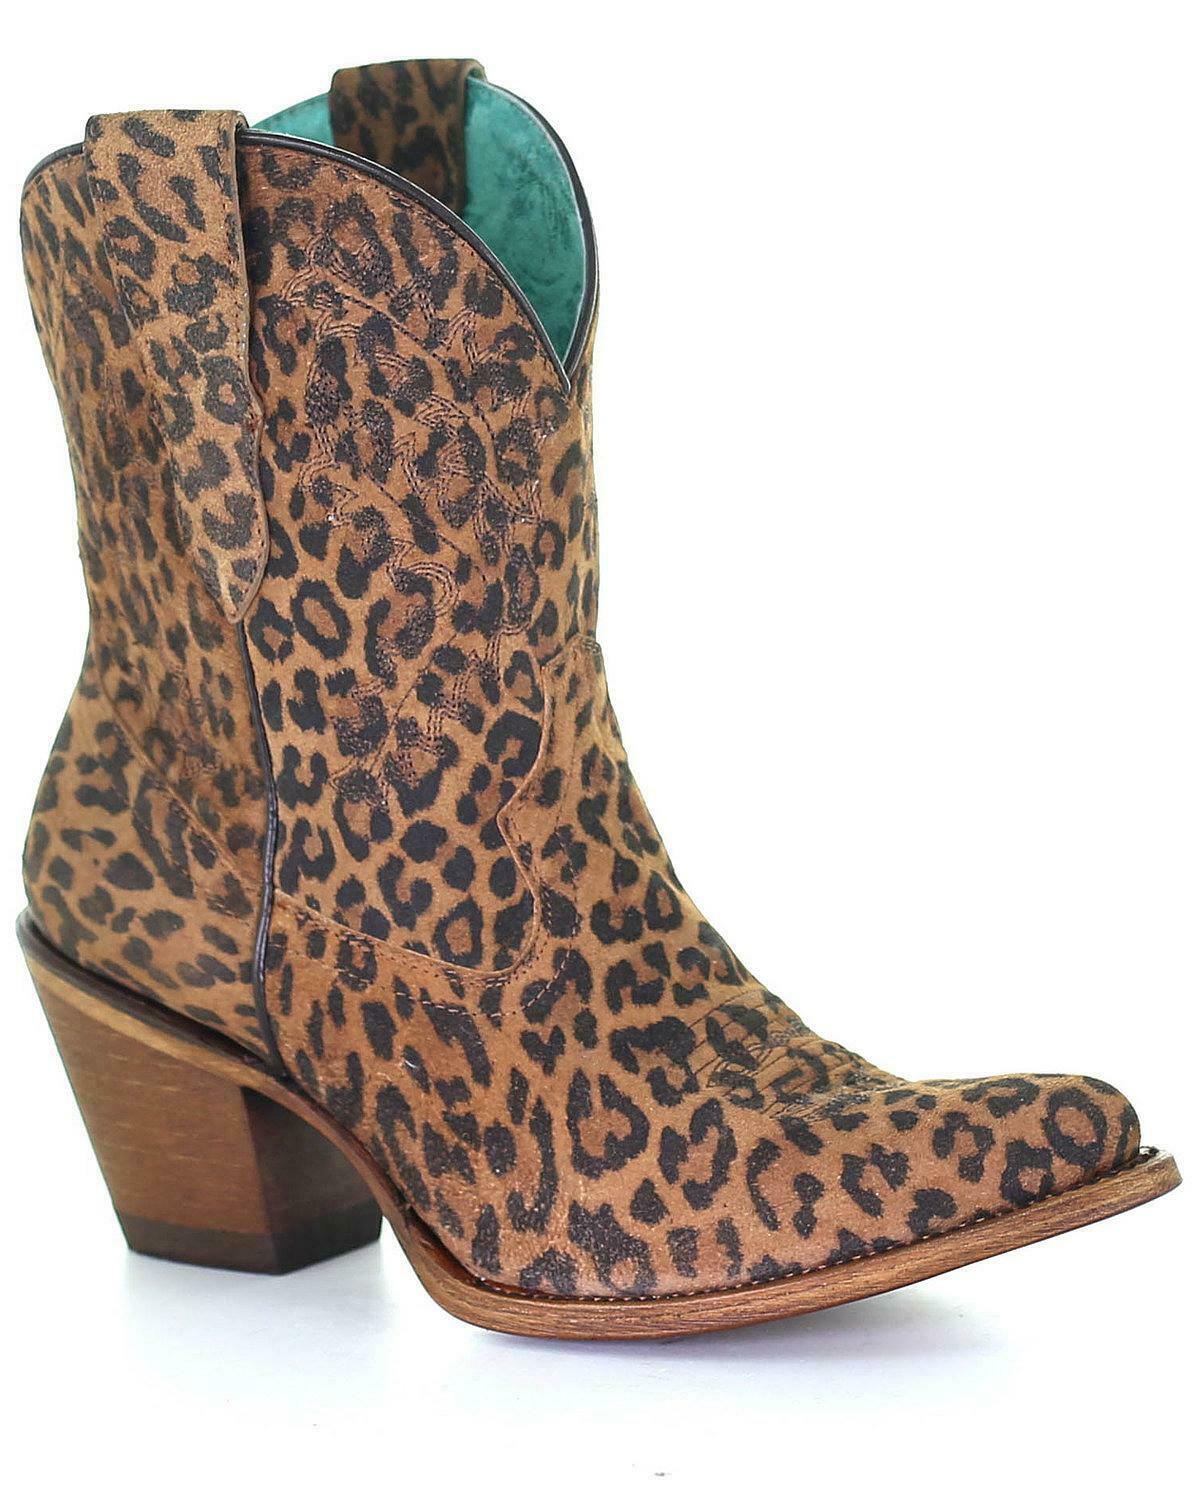 Corral Ladies Leopard Print and Embroidery Leather Ankle Boots E1650